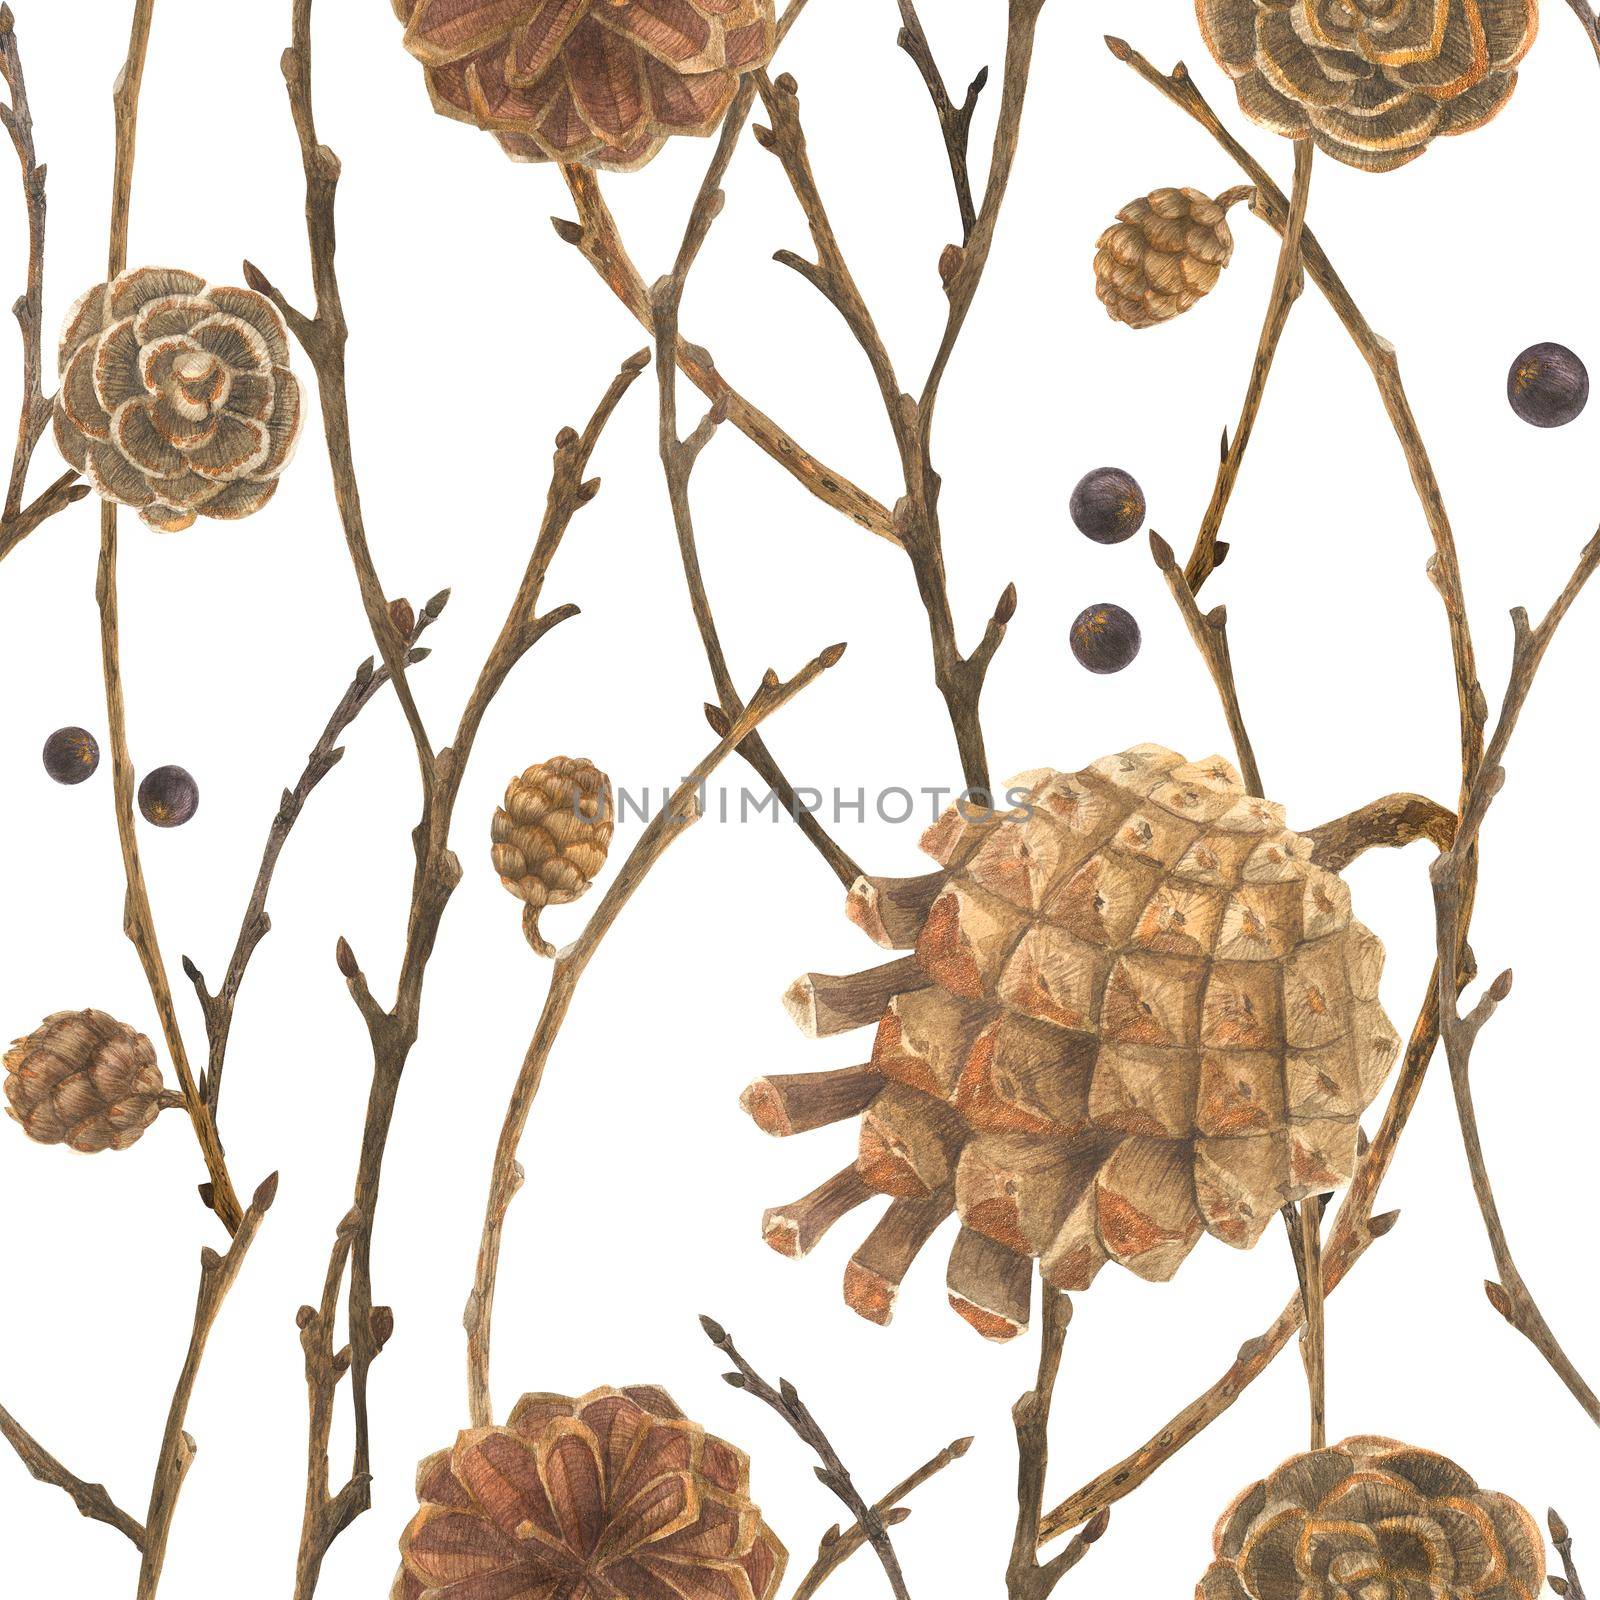 Botanical watercolor. Cones and branches. Wild nature forest seamless pattern for Christmas design, path included.